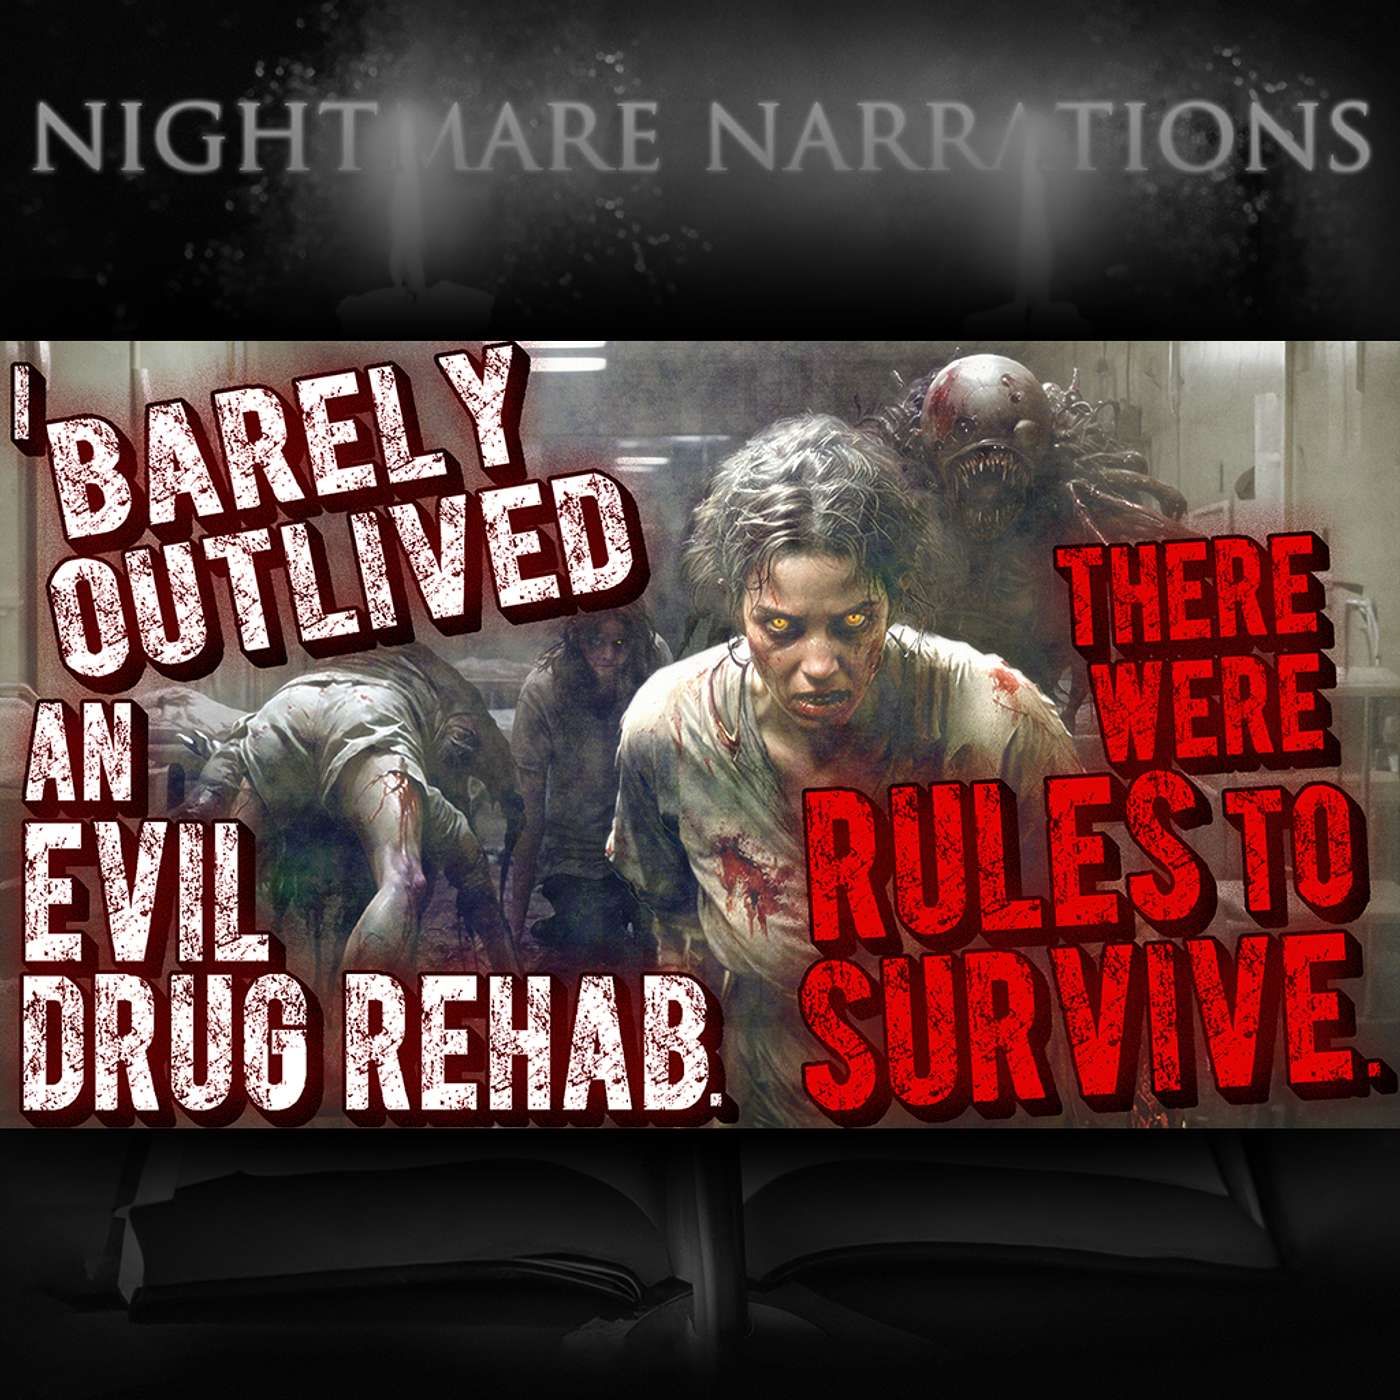 I Barely Outlived an Evil Drug Rehab. There Were Rules to Survive.